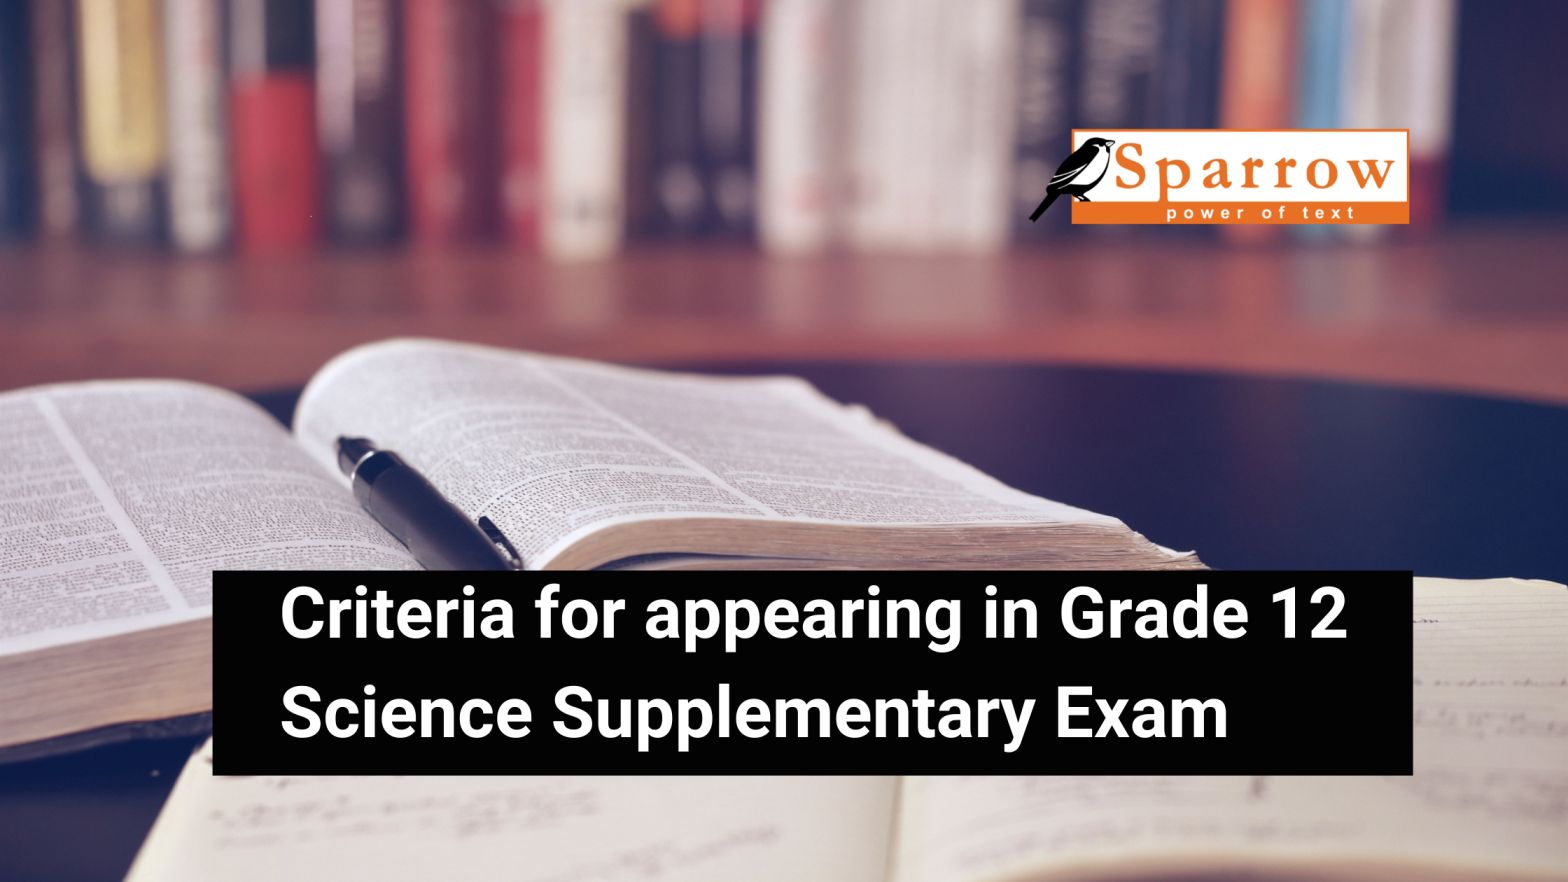 Criteria for appearing in Grade 12 Science Supplementary Exam